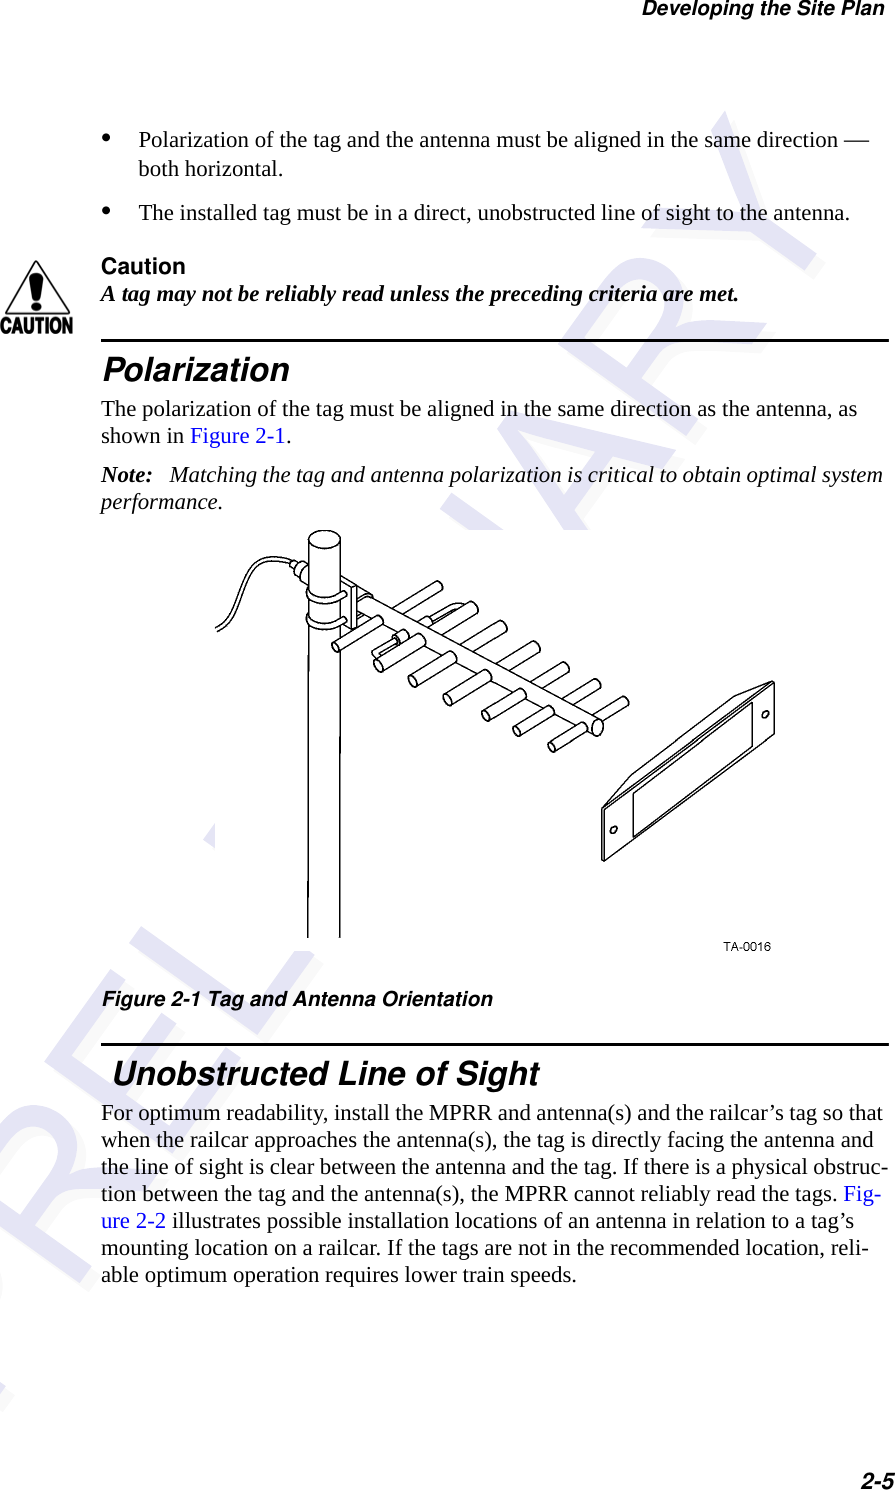 Developing the Site Plan2-5•Polarization of the tag and the antenna must be aligned in the same direction — both horizontal.•The installed tag must be in a direct, unobstructed line of sight to the antenna.CautionA tag may not be reliably read unless the preceding criteria are met.PolarizationThe polarization of the tag must be aligned in the same direction as the antenna, as shown in Figure 2-1.Note:   Matching the tag and antenna polarization is critical to obtain optimal system performance.Figure 2-1 Tag and Antenna Orientation Unobstructed Line of SightFor optimum readability, install the MPRR and antenna(s) and the railcar’s tag so that when the railcar approaches the antenna(s), the tag is directly facing the antenna and the line of sight is clear between the antenna and the tag. If there is a physical obstruc-tion between the tag and the antenna(s), the MPRR cannot reliably read the tags. Fig-ure 2-2 illustrates possible installation locations of an antenna in relation to a tag’s mounting location on a railcar. If the tags are not in the recommended location, reli-able optimum operation requires lower train speeds.